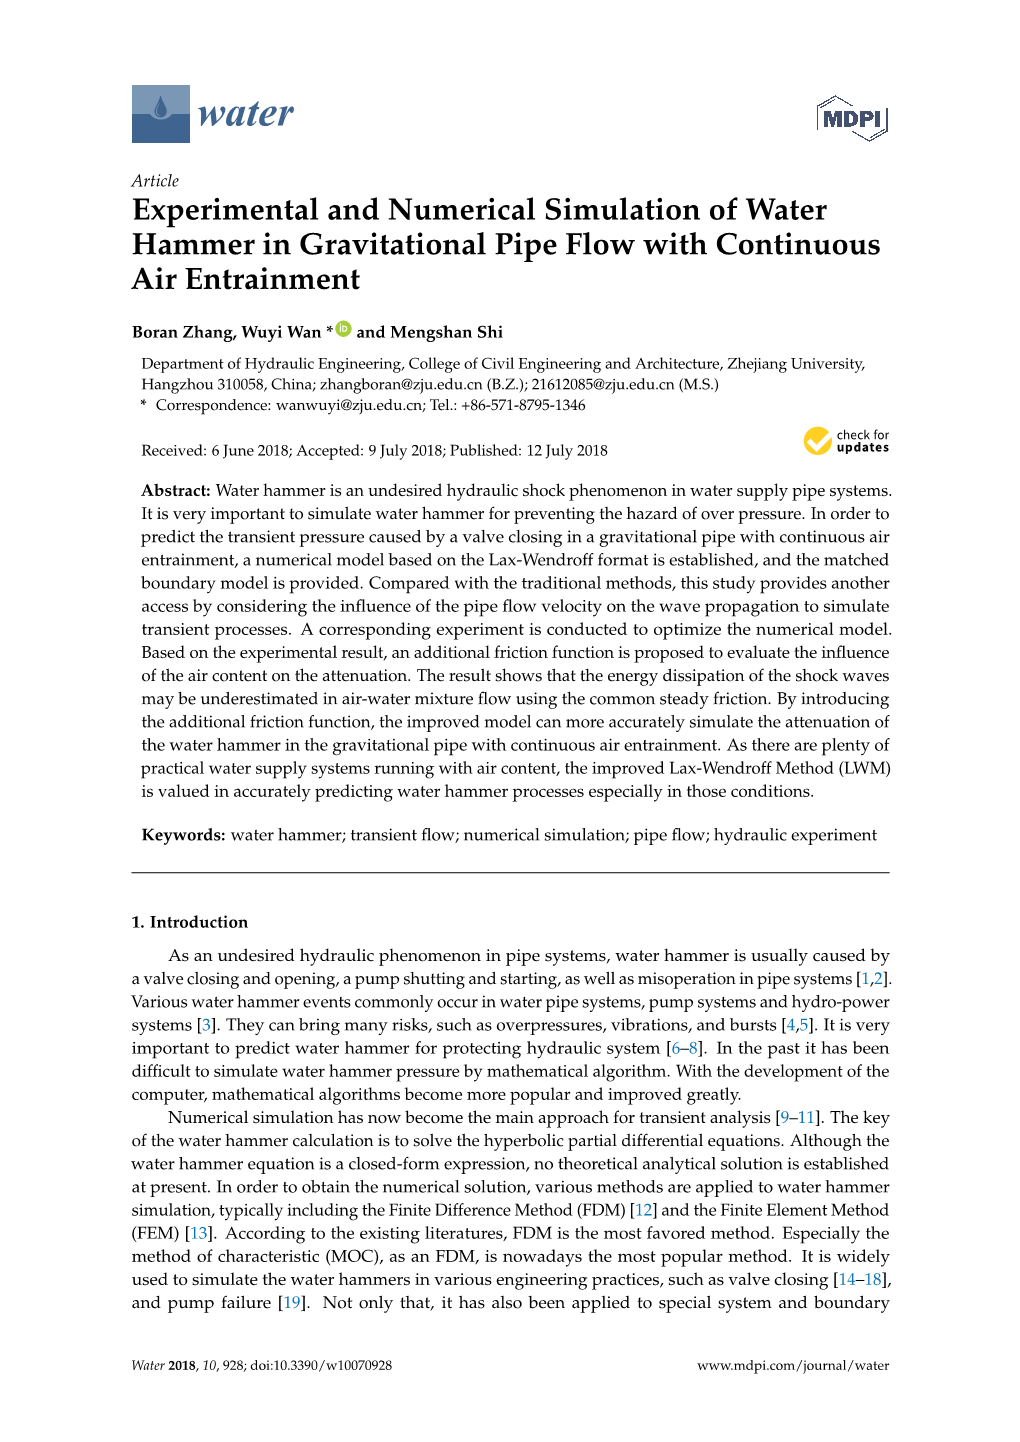 Experimental and Numerical Simulation of Water Hammer in Gravitational Pipe Flow with Continuous Air Entrainment